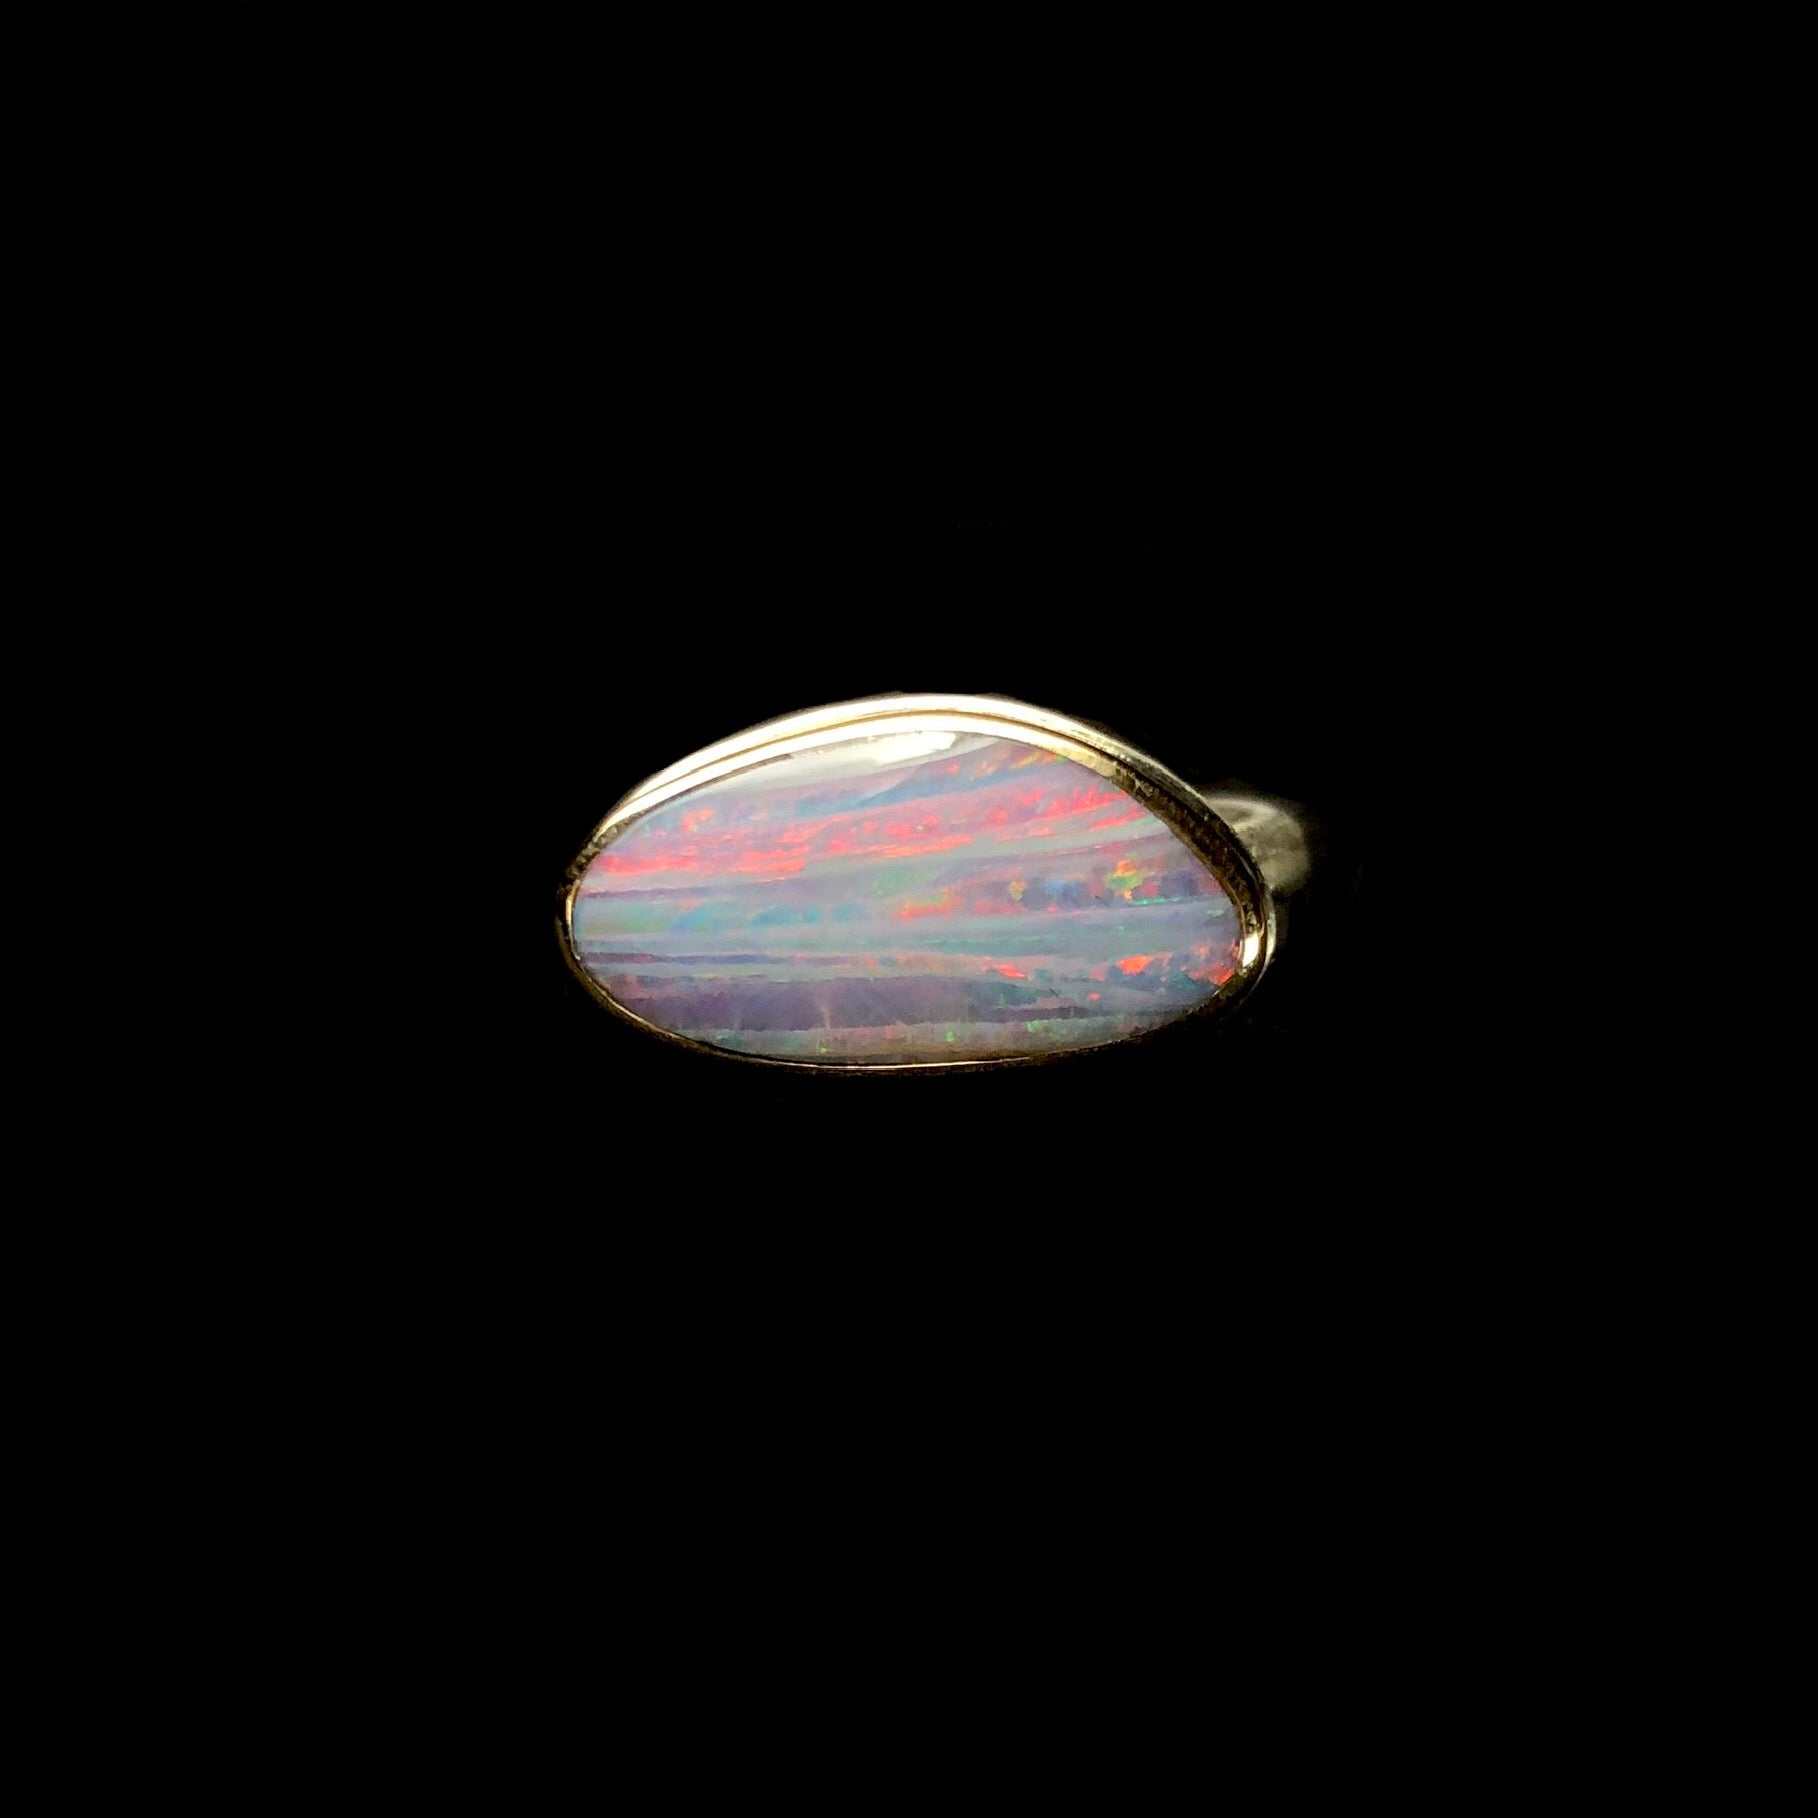 Asymmetrically shaped Boulder Opal with layers of pink, grey, purple, and green in the stone